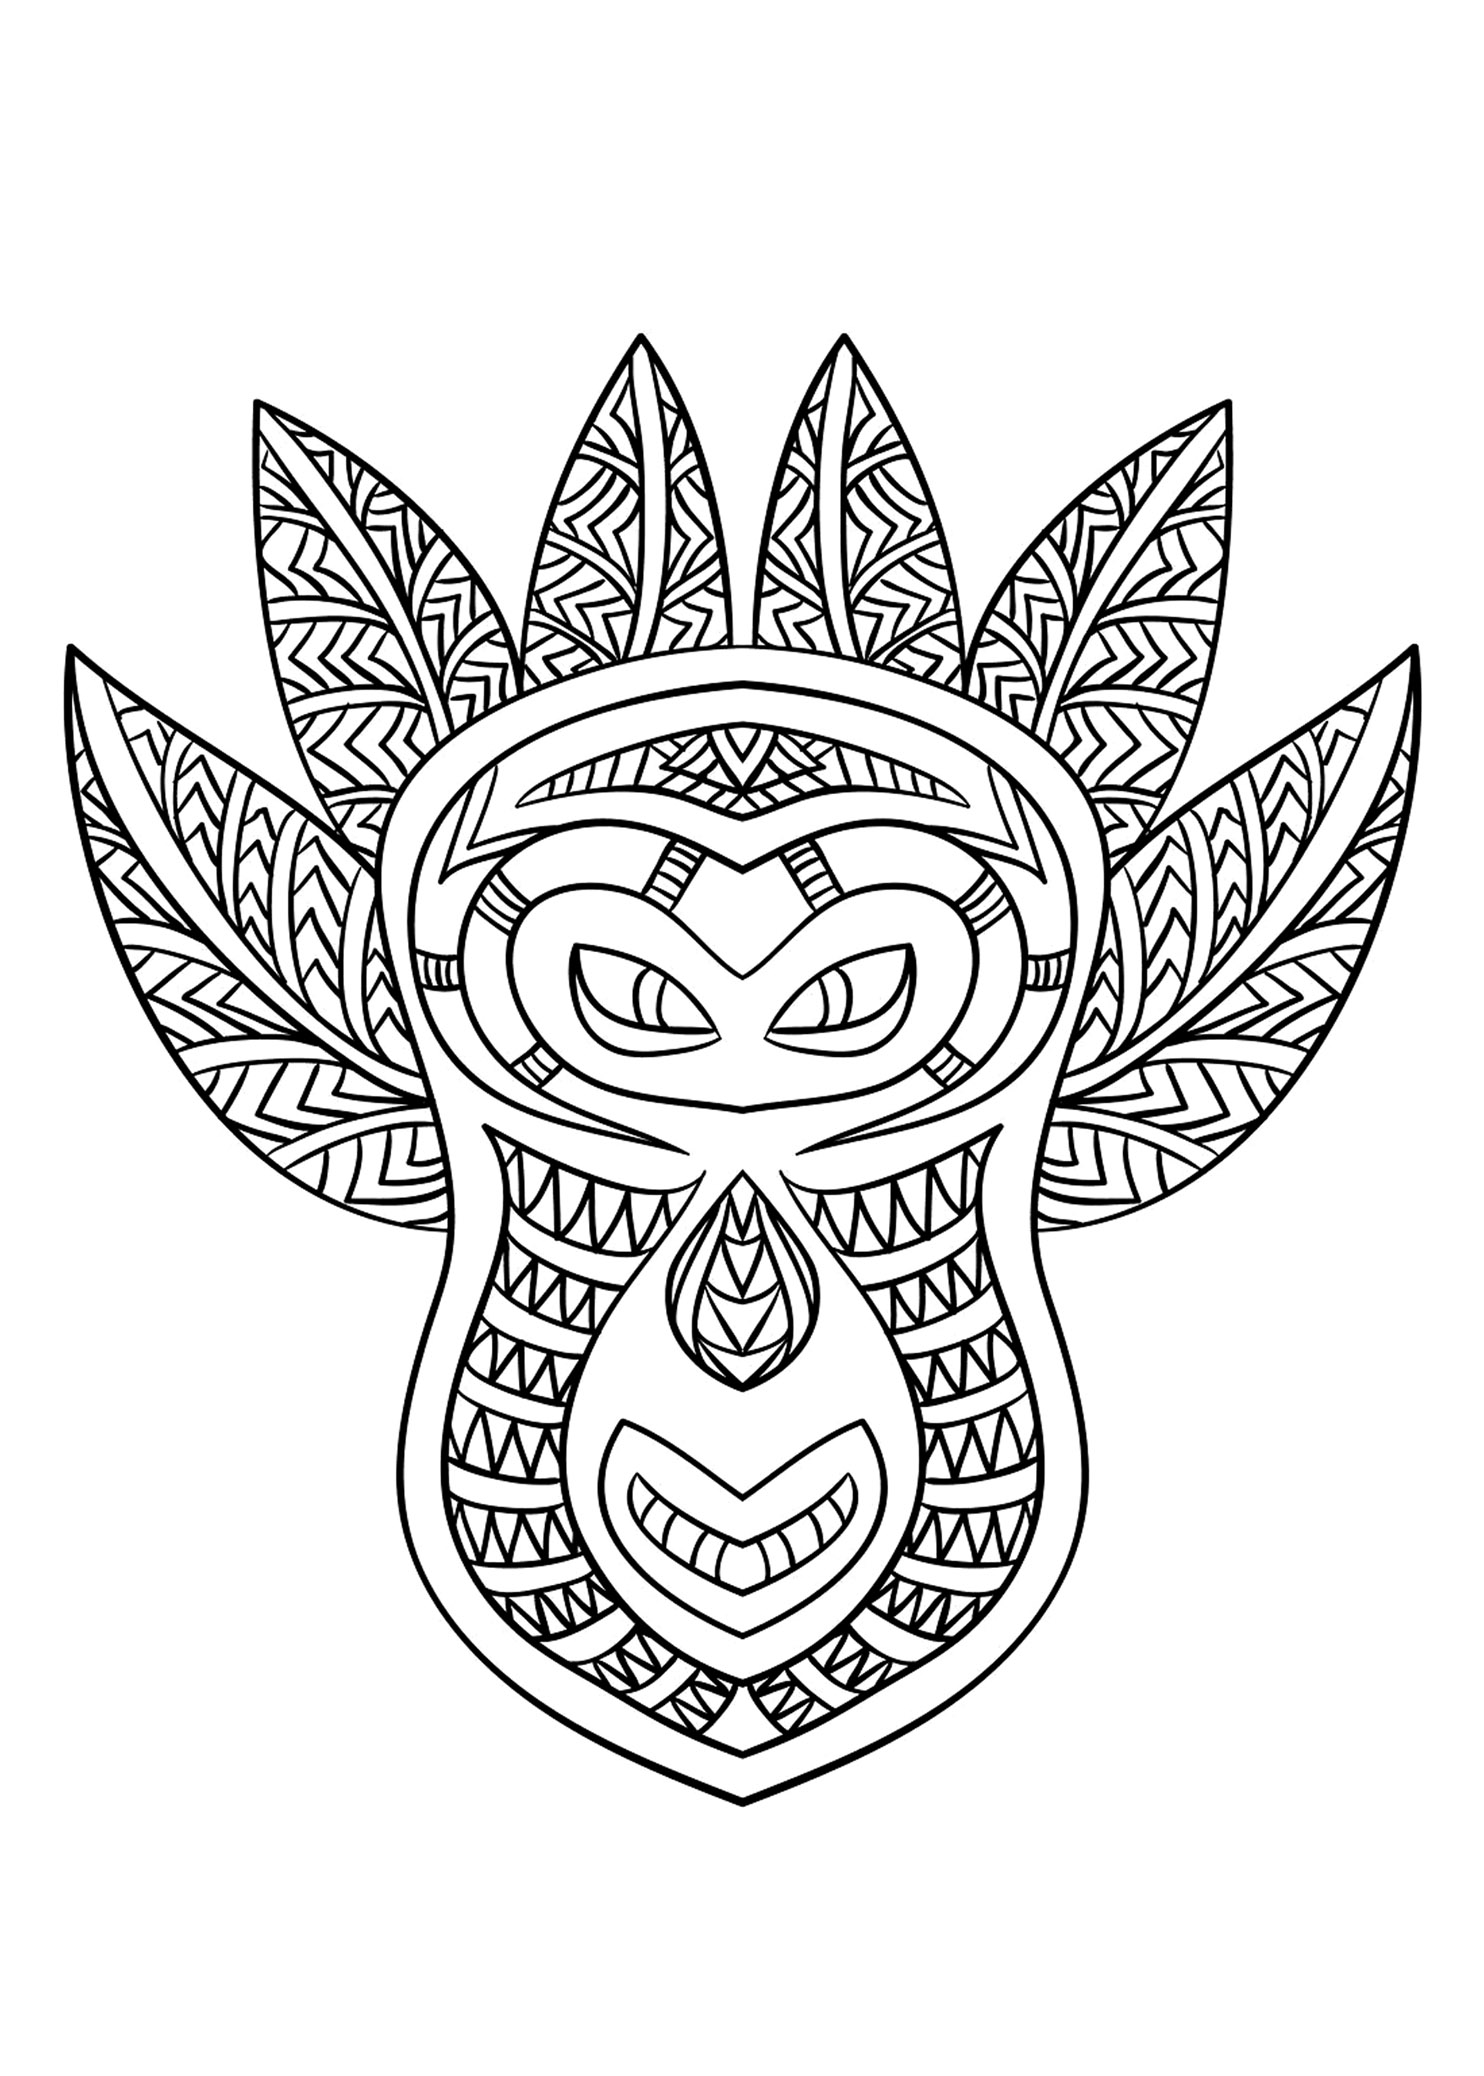 Coloring picture of an African mask - 6